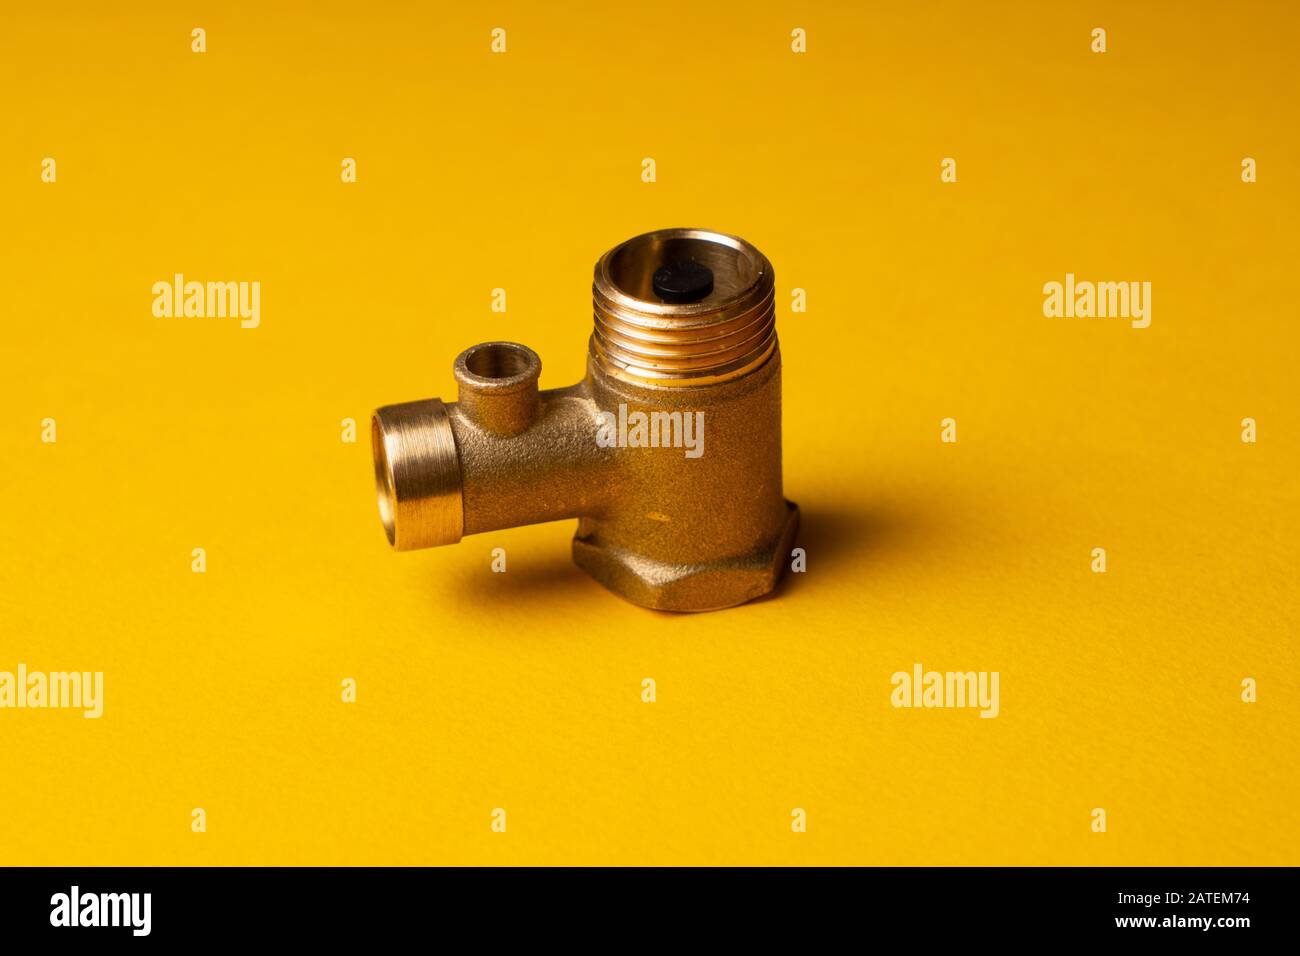 Bronze Check Valve. Non-return valve for water in the electric water